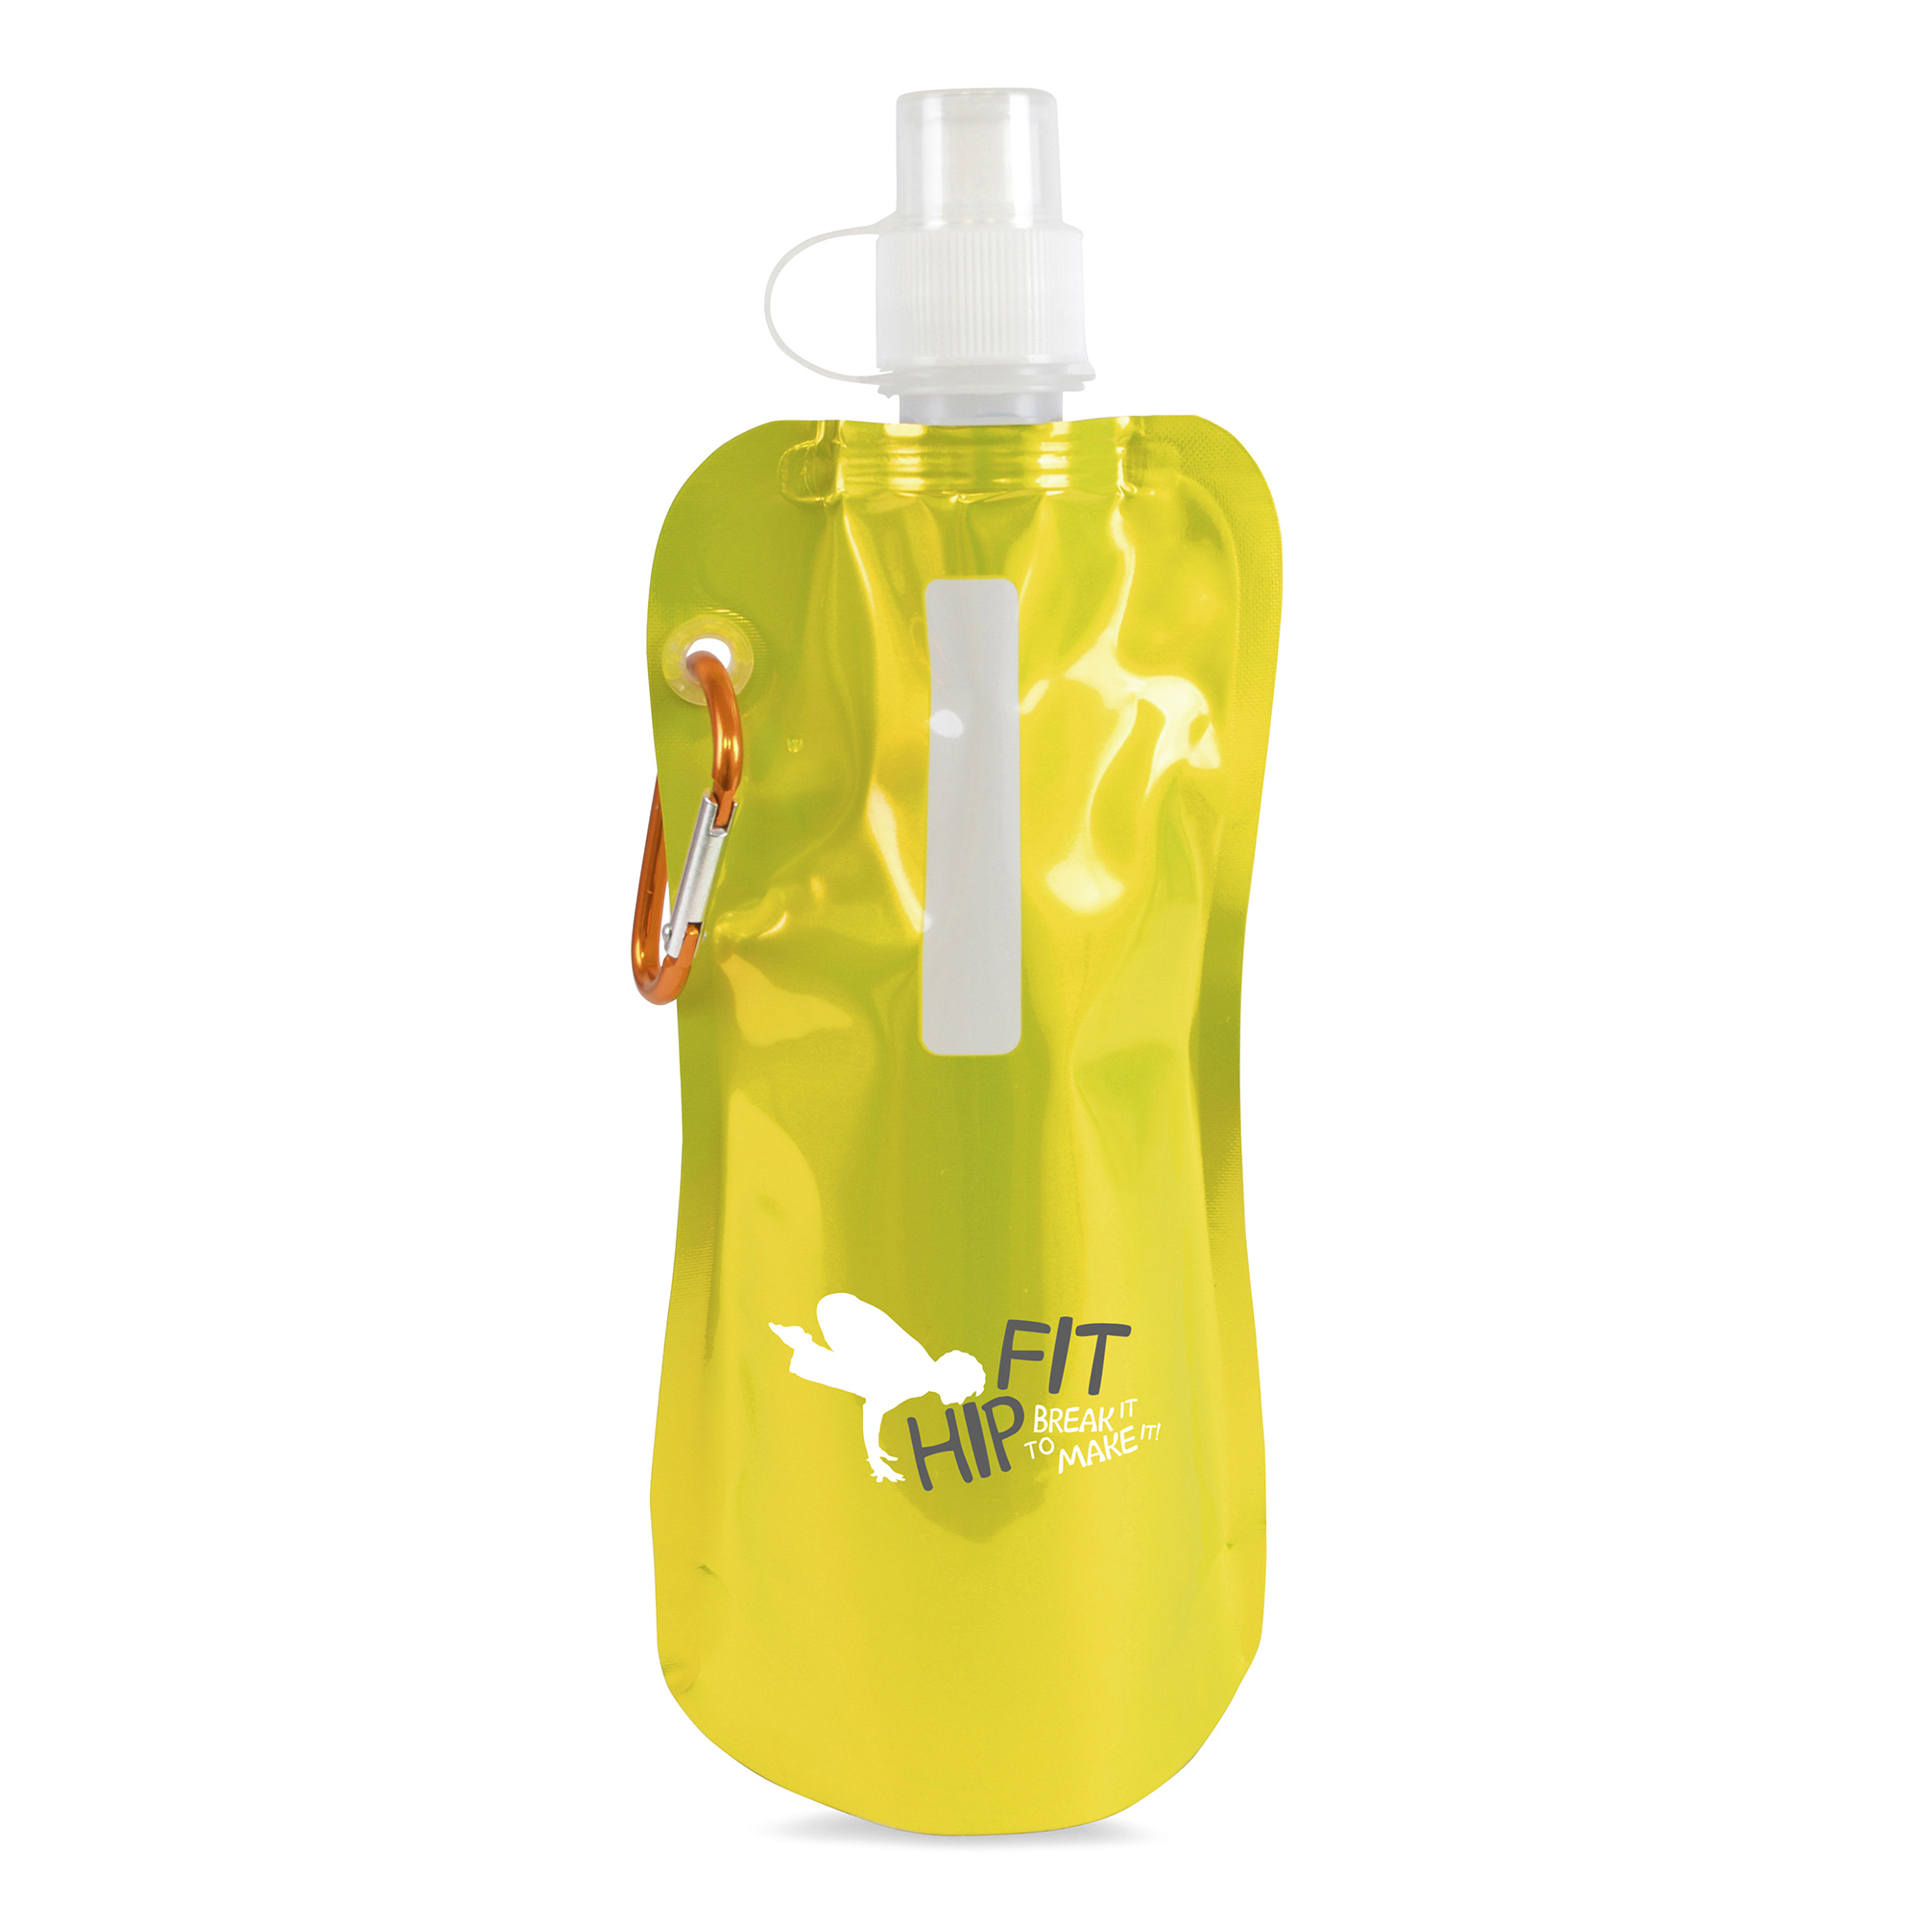 Metallic yellow roll up 400ml drinks pouch with hook